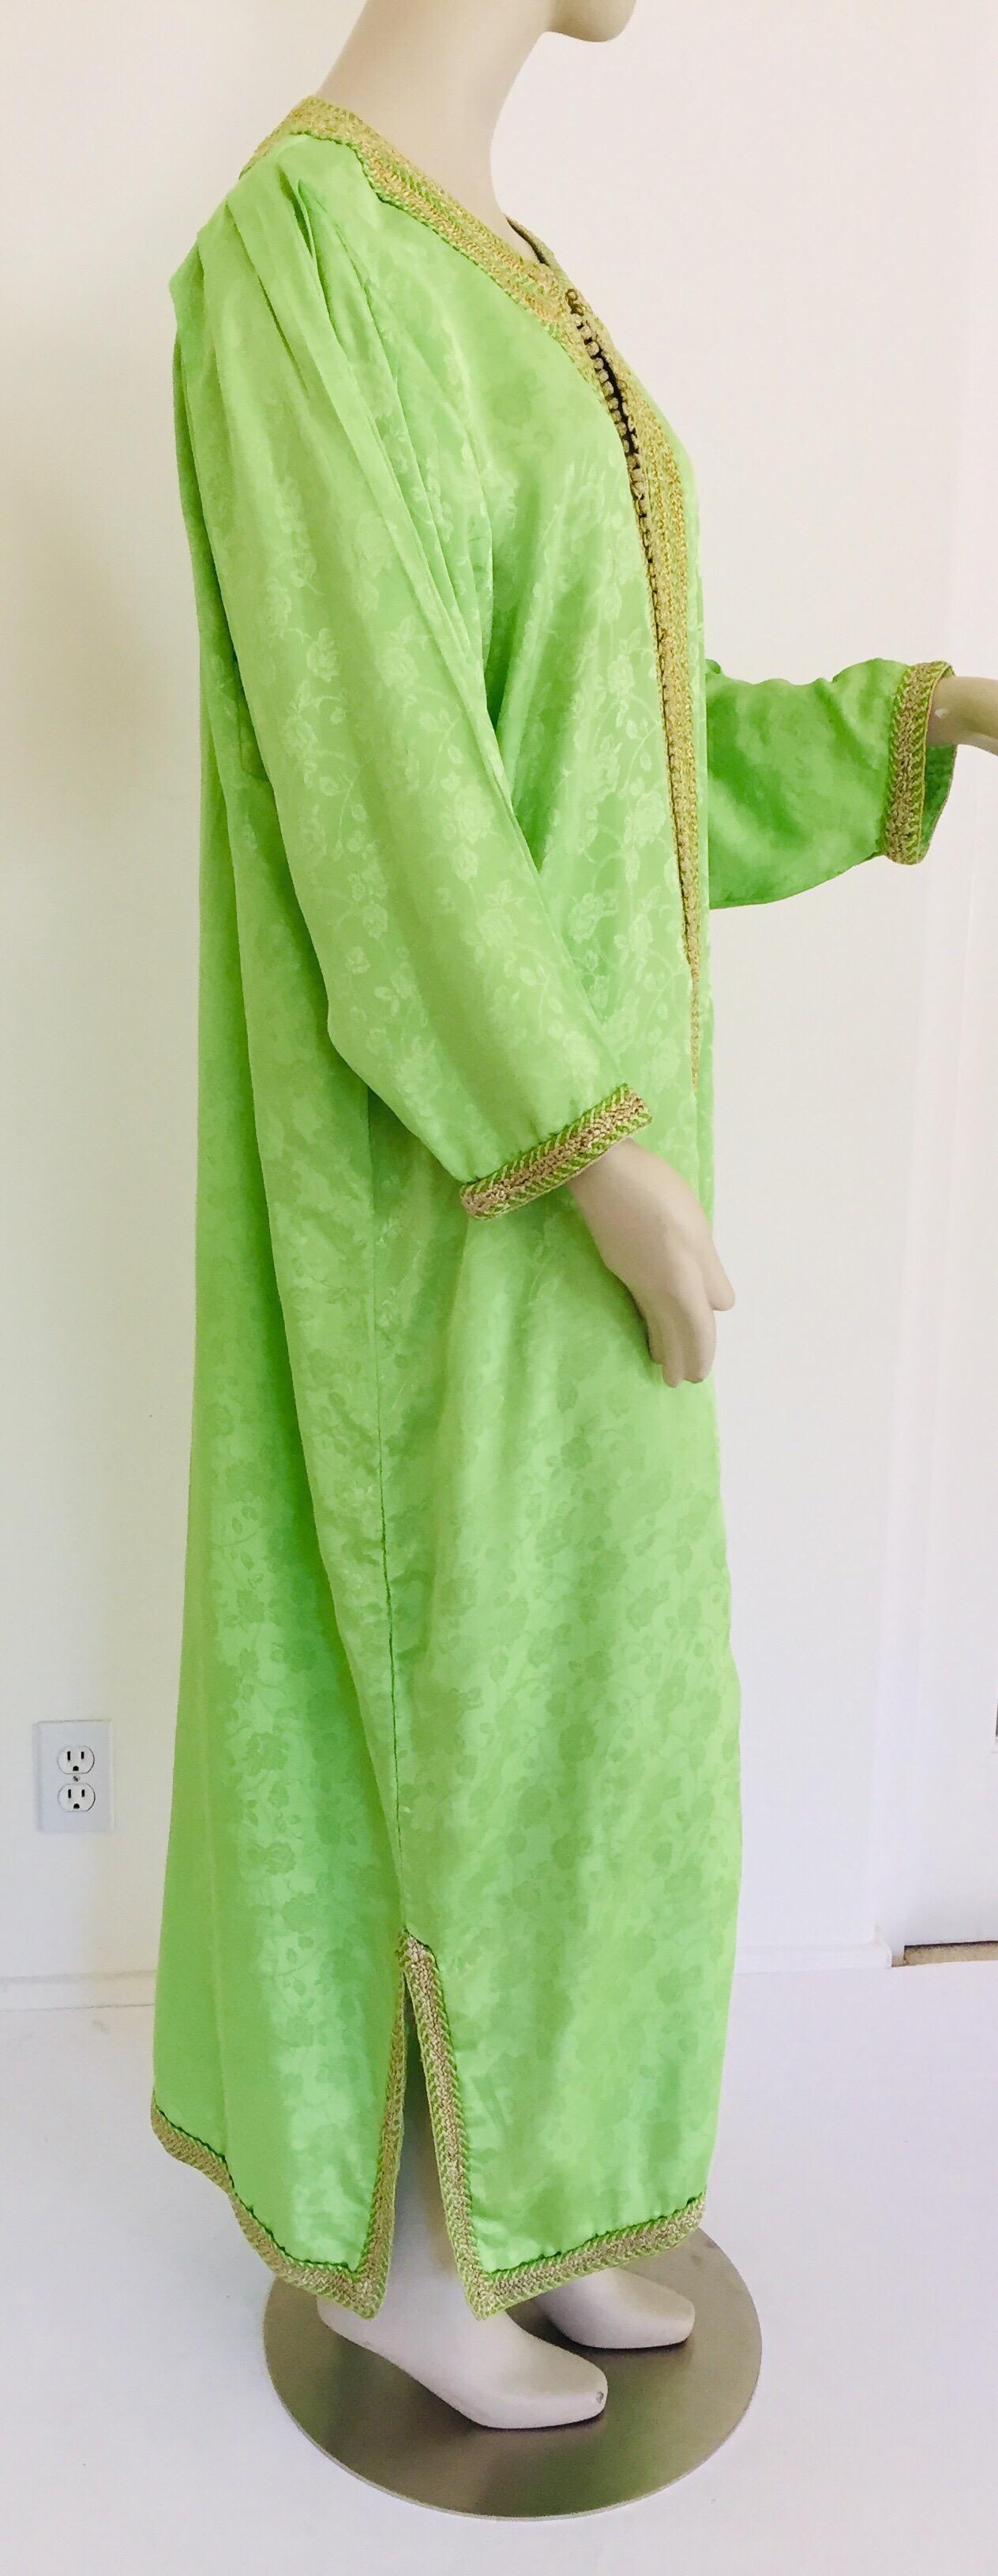 Women's Elegant Moroccan Caftan Green and Gold Embroidered with Moorish Designs For Sale